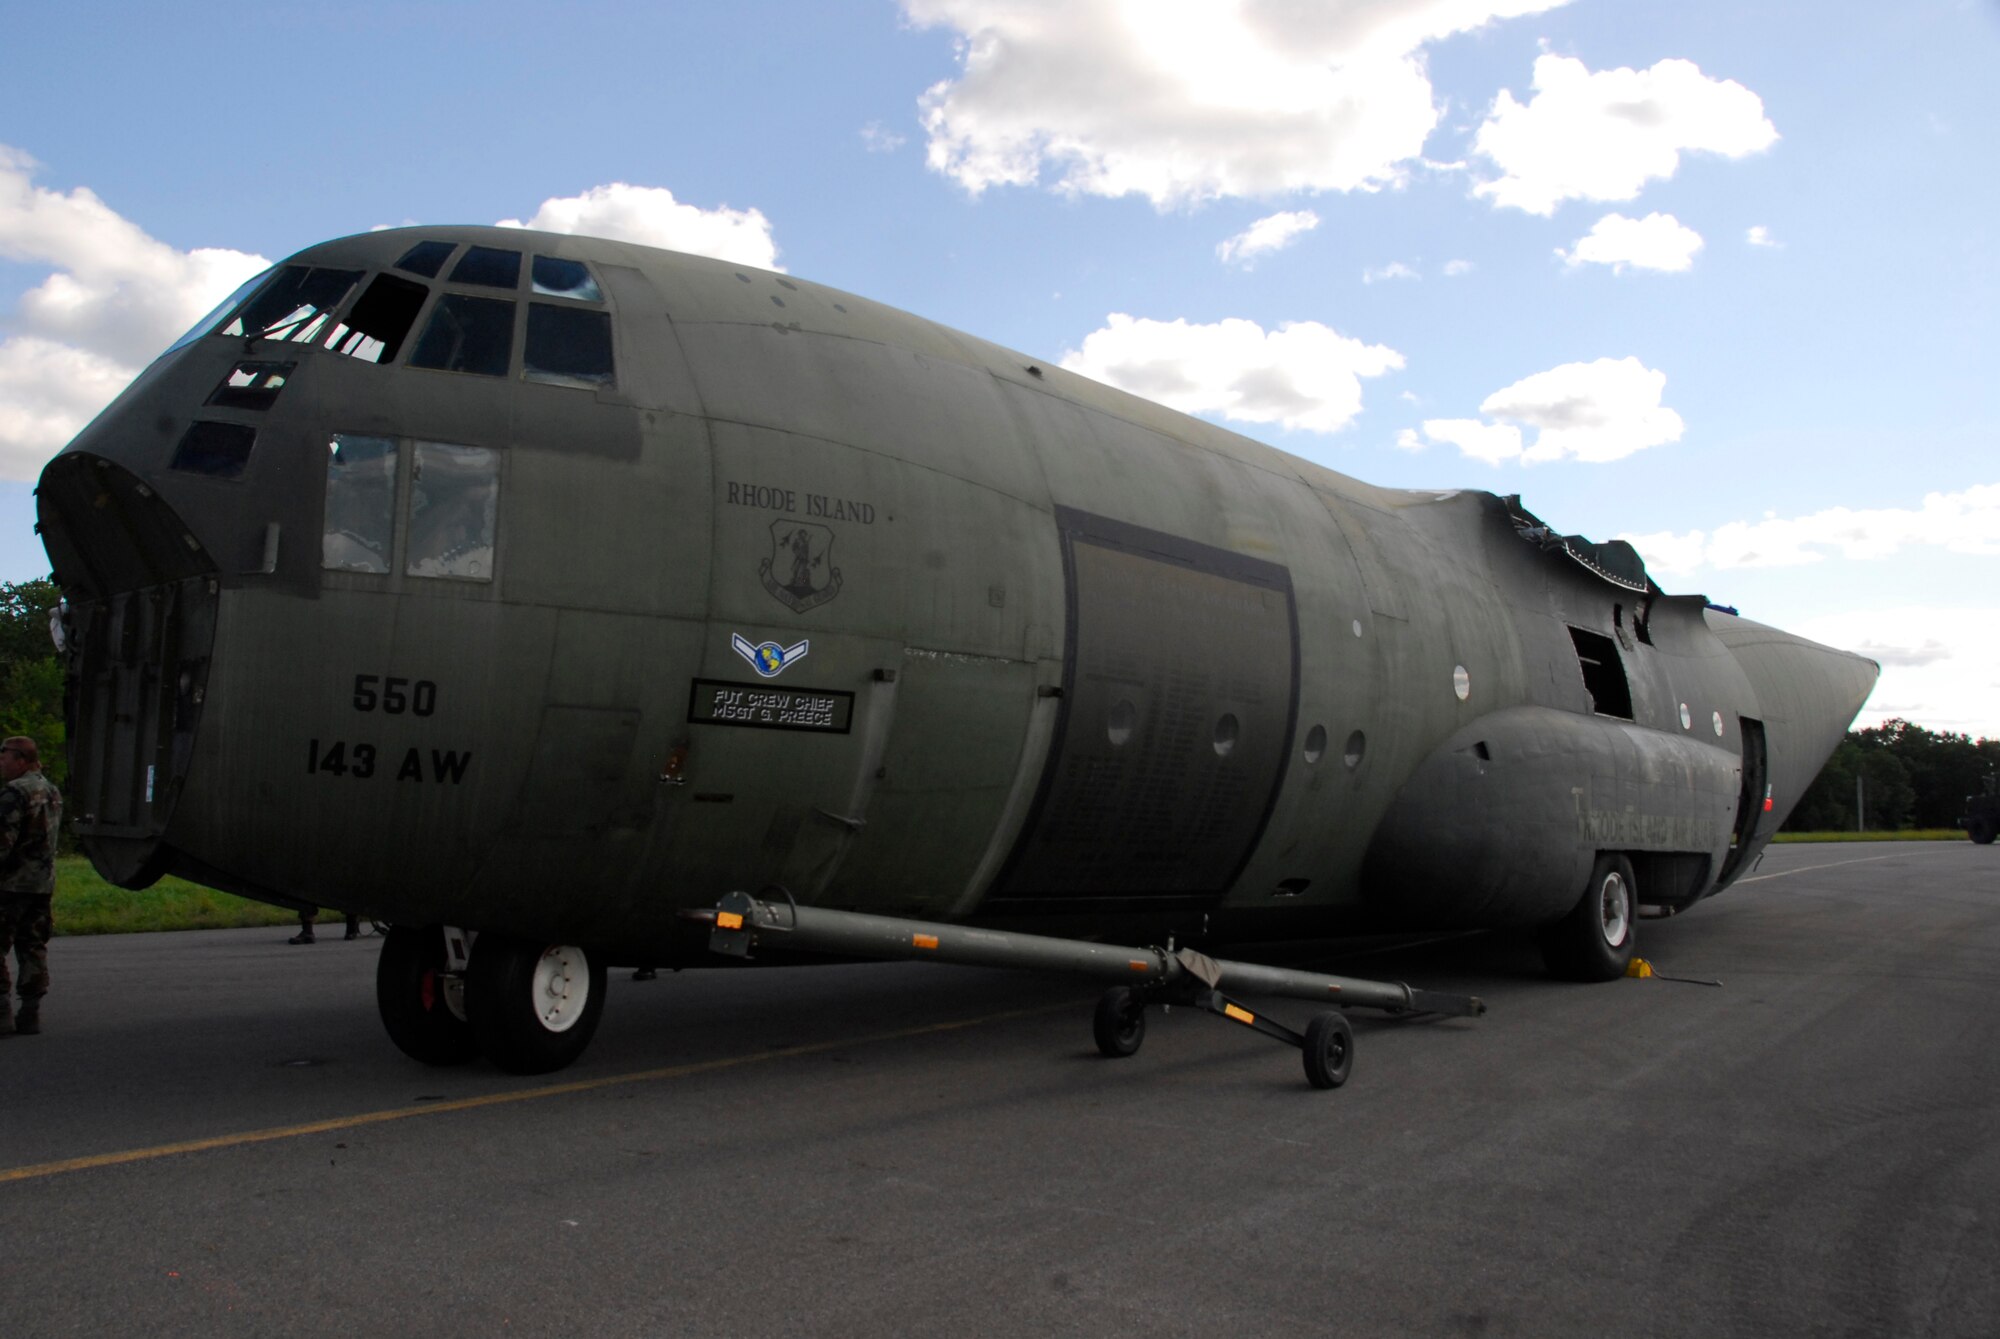 STRATTON AIR NATIONAL GUARD BASE, N.Y. -- This C-130A fuselage from Rhode Island Air National Guard's 143rd Airlift Wing sits on the flightline here. The aircraft was transported here in a C-5 for training use. 